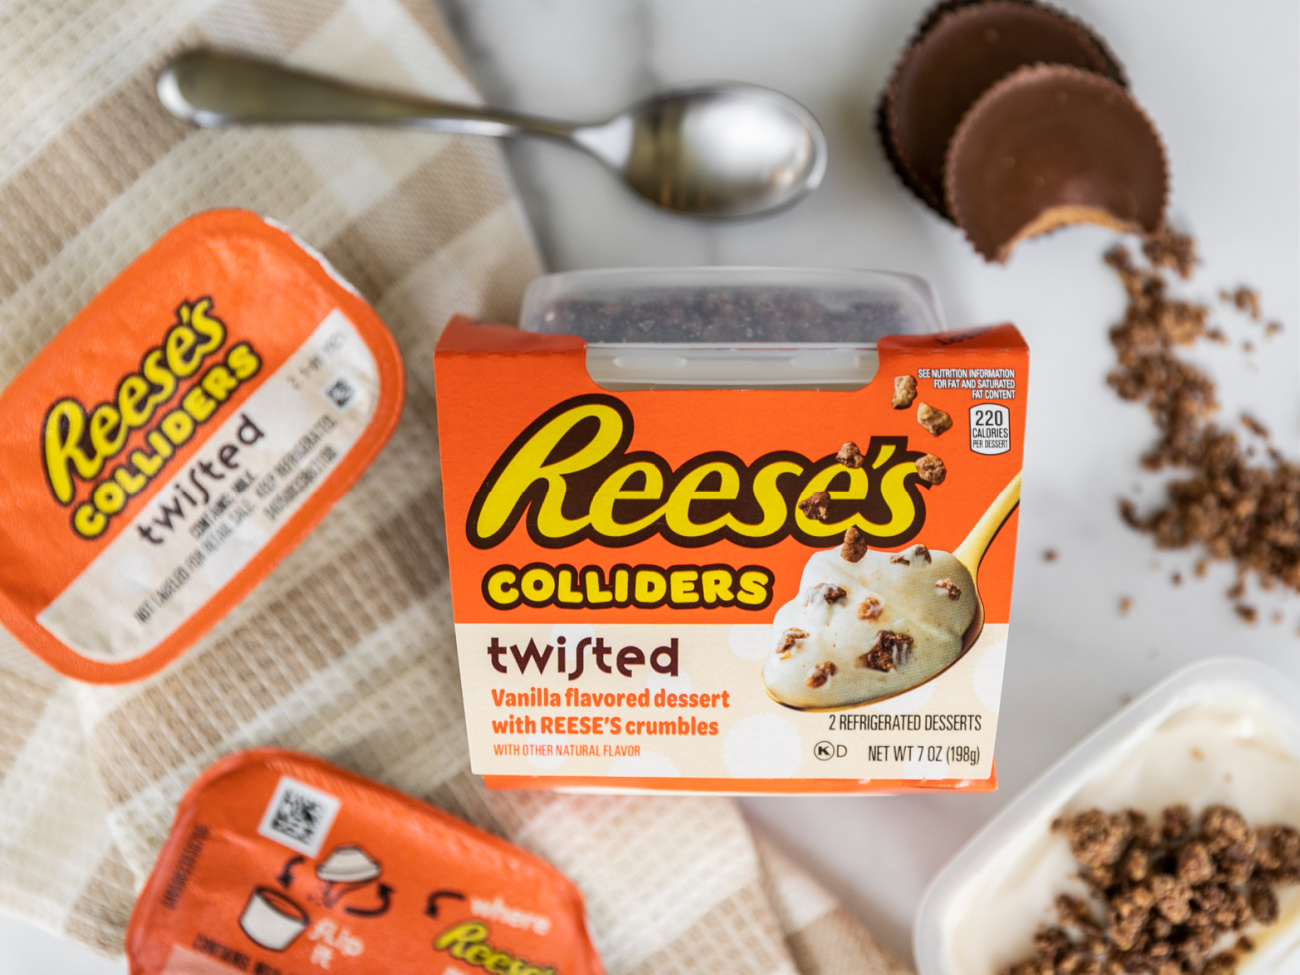 Hershey's Colliders Are New At Publix And Available In Five Delicious Varieties! on I Heart Publix 1